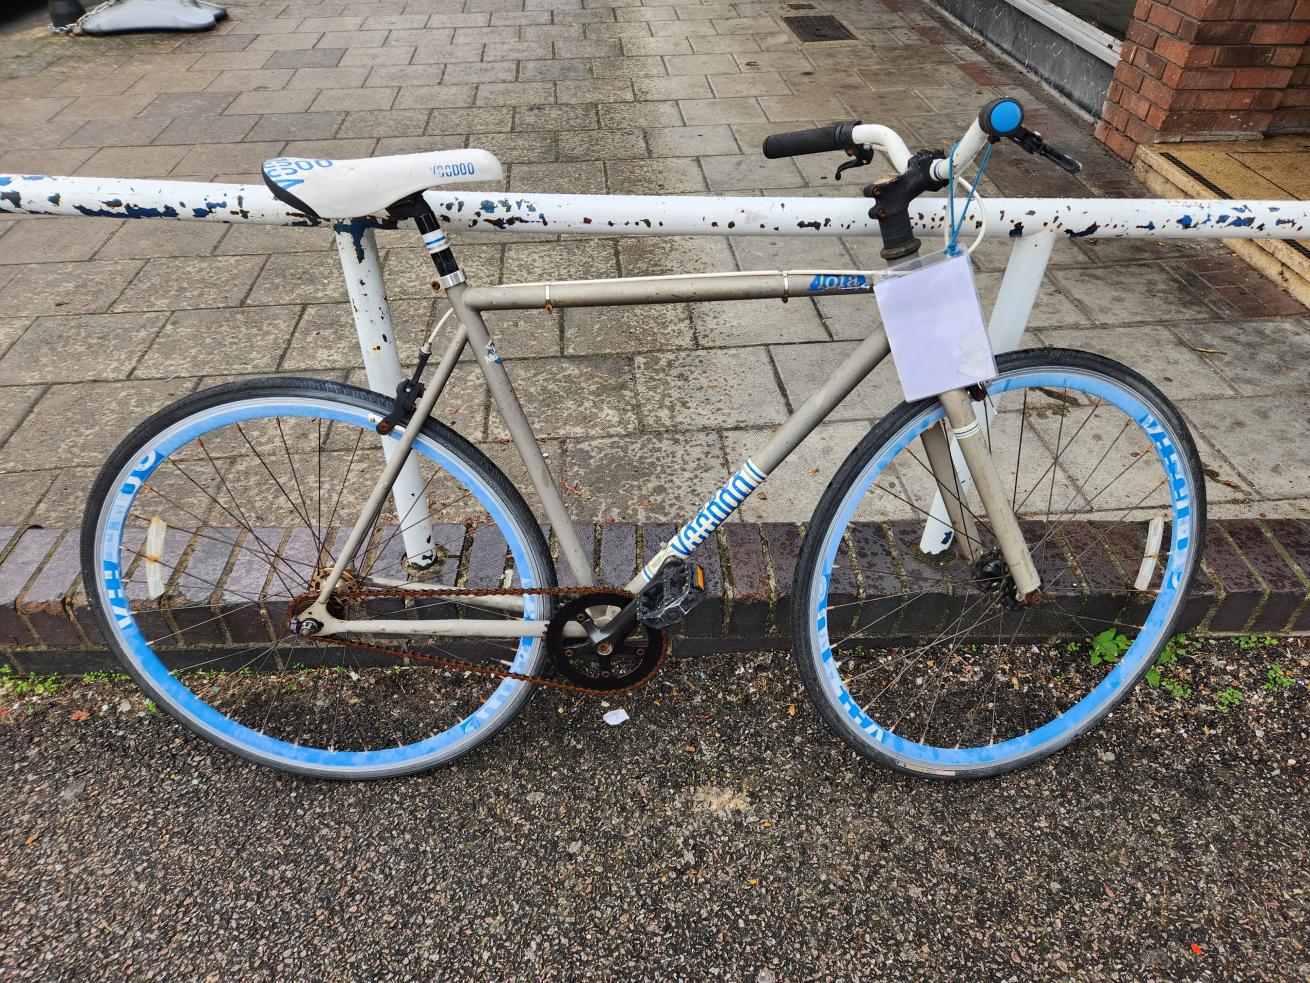 A white bike with blue and black wheels leaning on a white metal railing